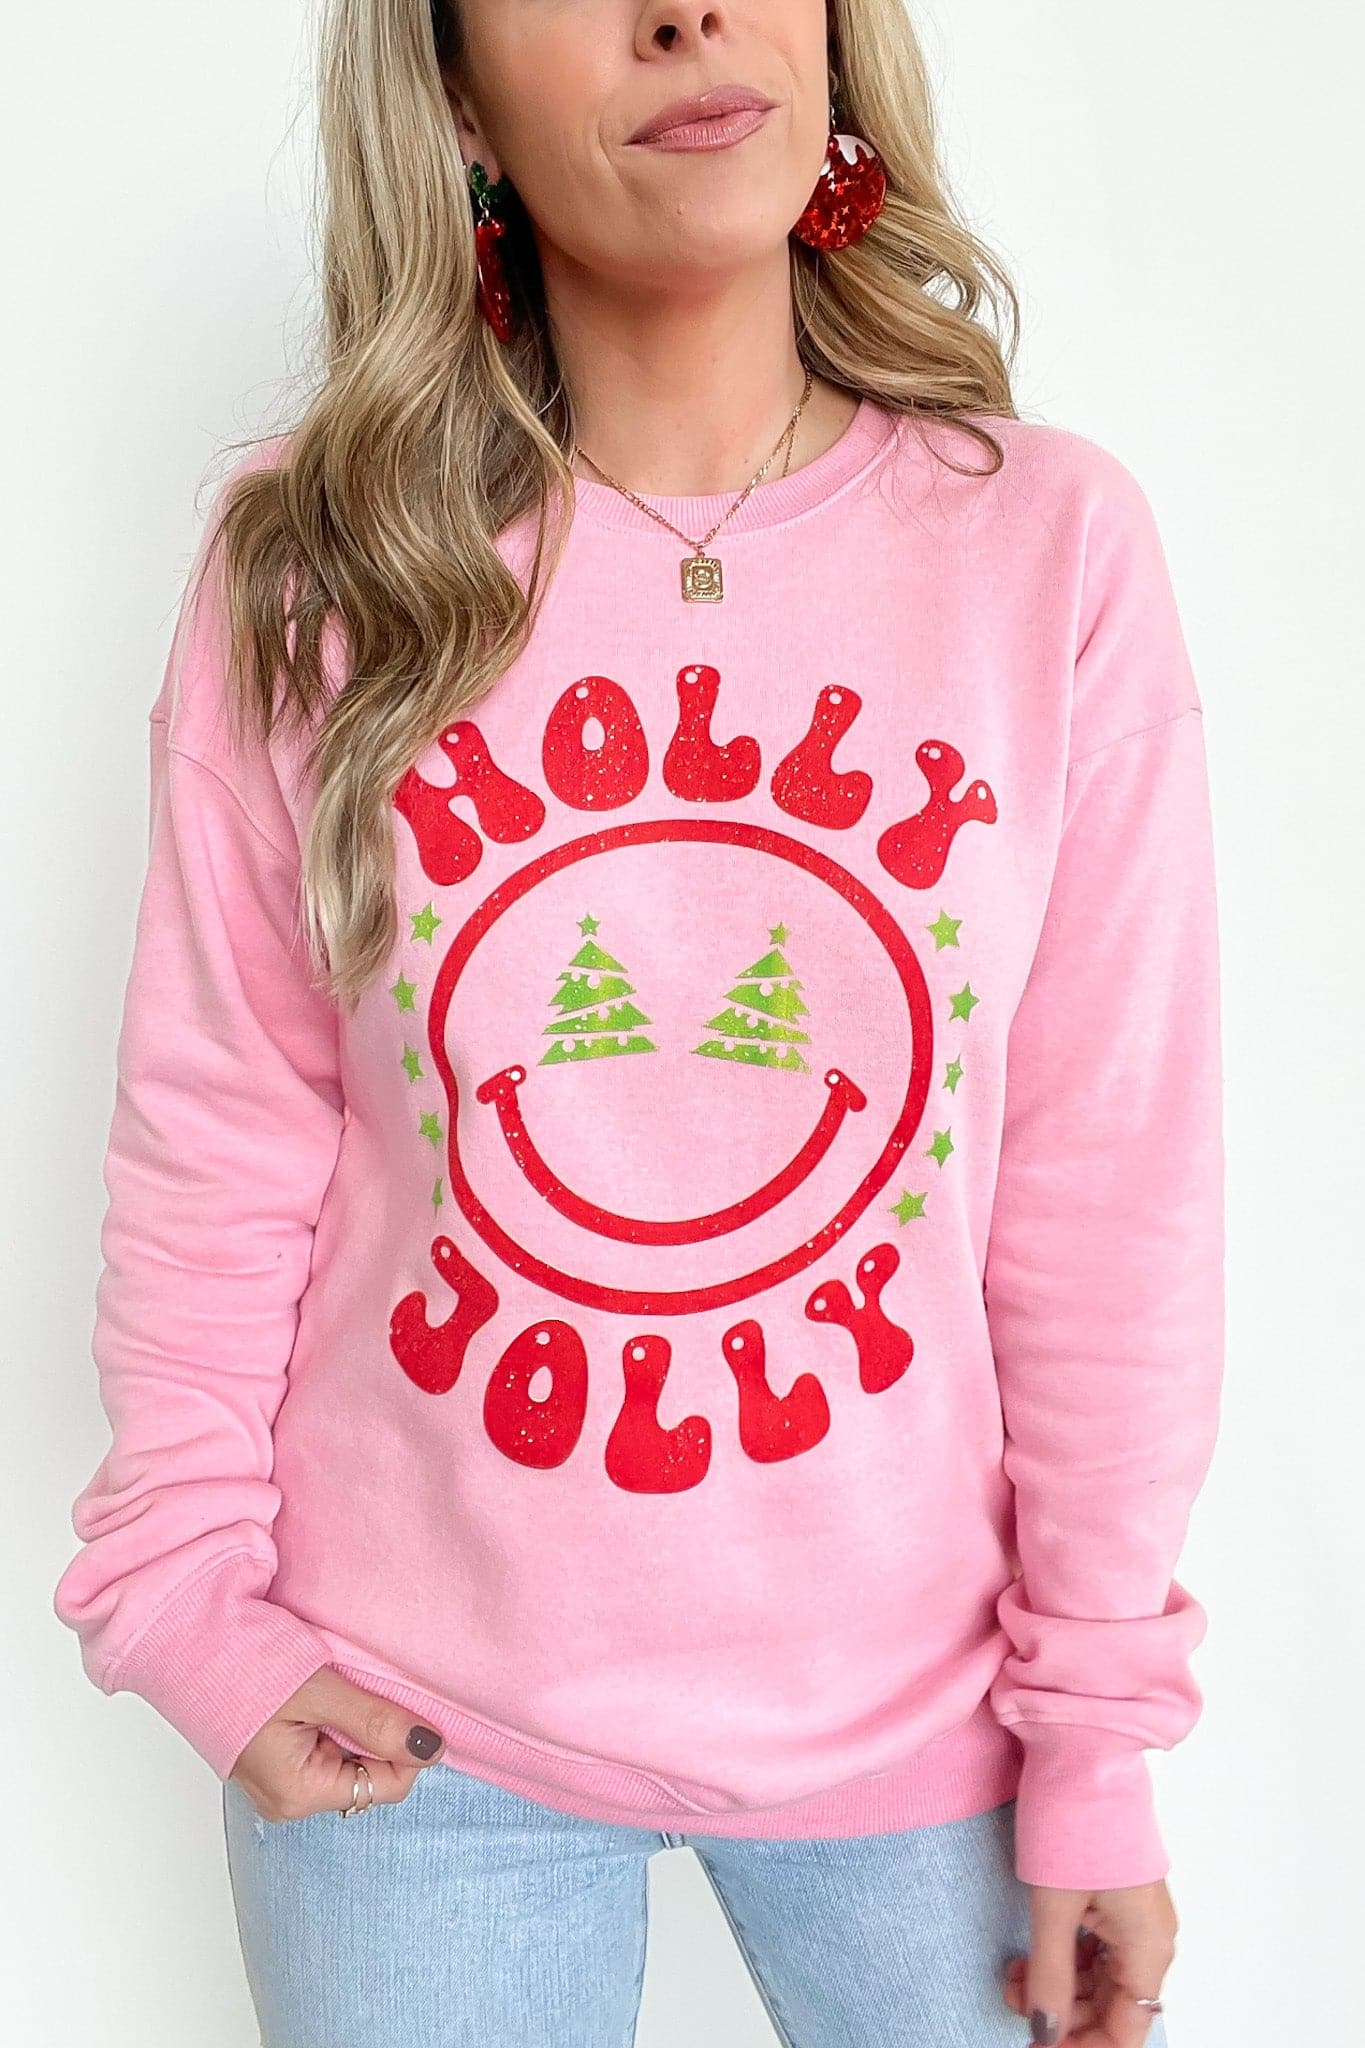  Holly Jolly Smile Oversized Graphic Sweatshirt - FINAL SALE - Madison and Mallory